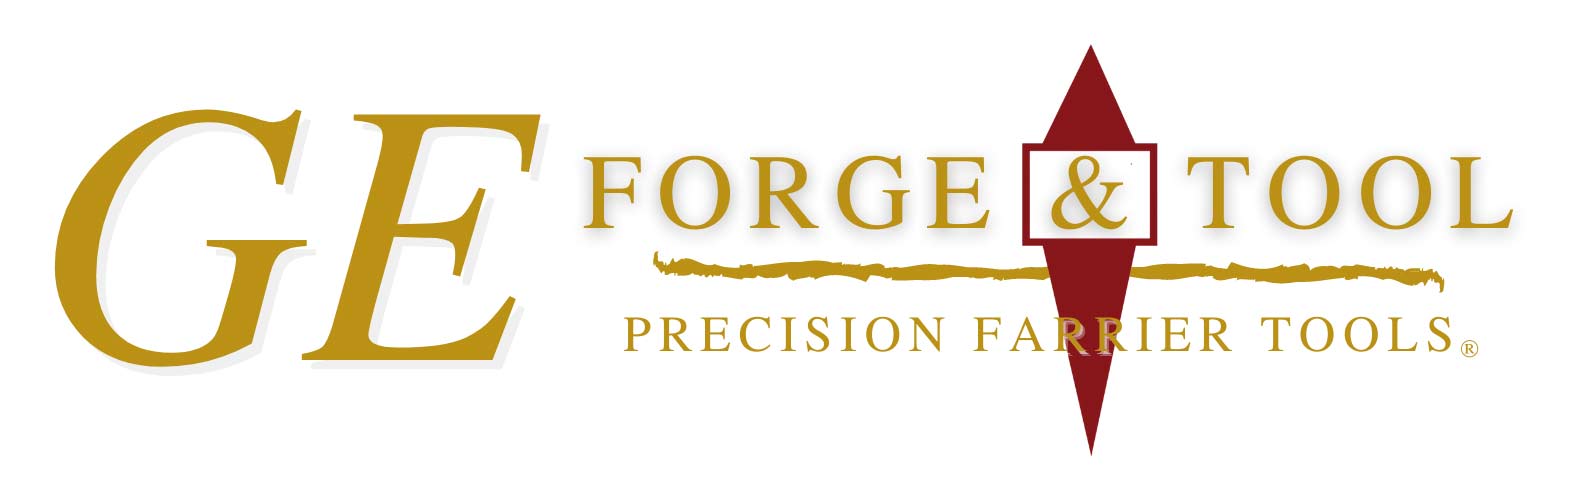 GE Forge